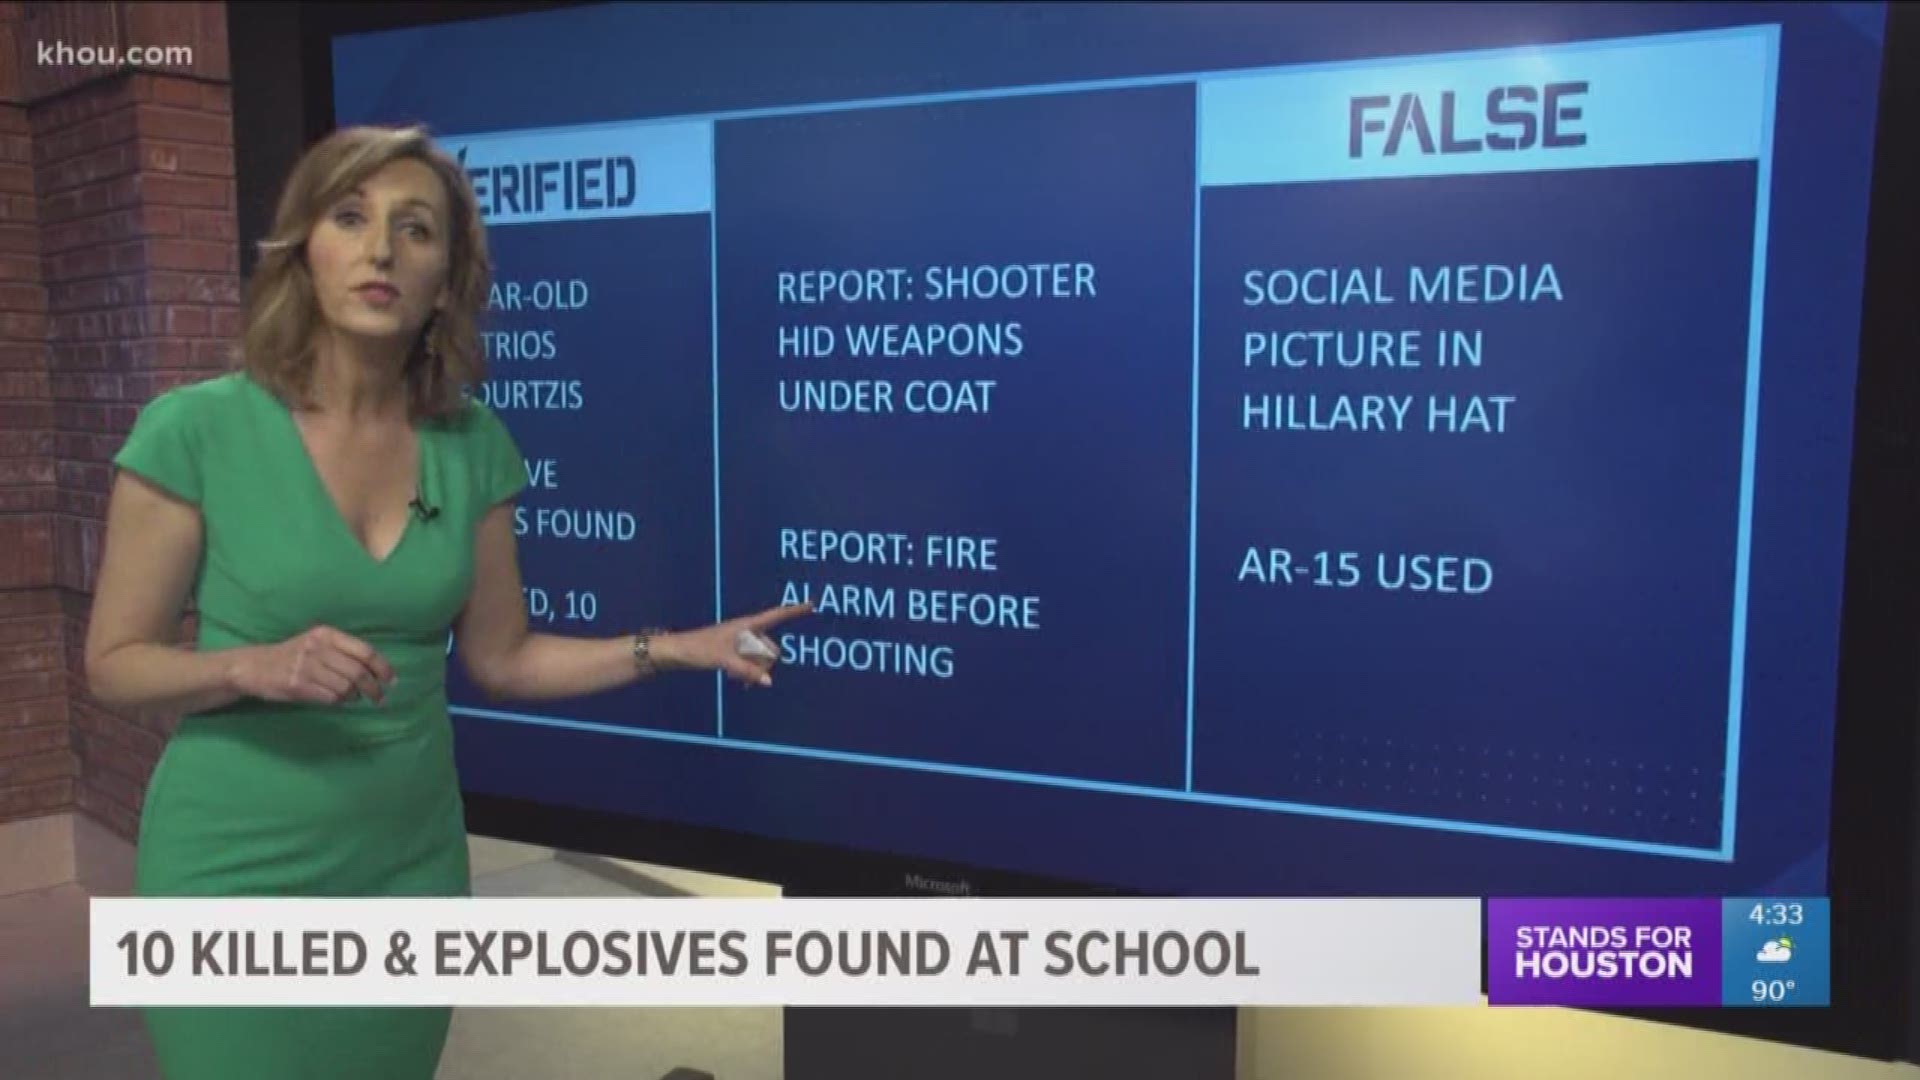 KHOU 11 News reporter Tiffany Craig has the latest on verified facts and information surrounding the mass shooting at Santa Fe High School on May 18, 2018.